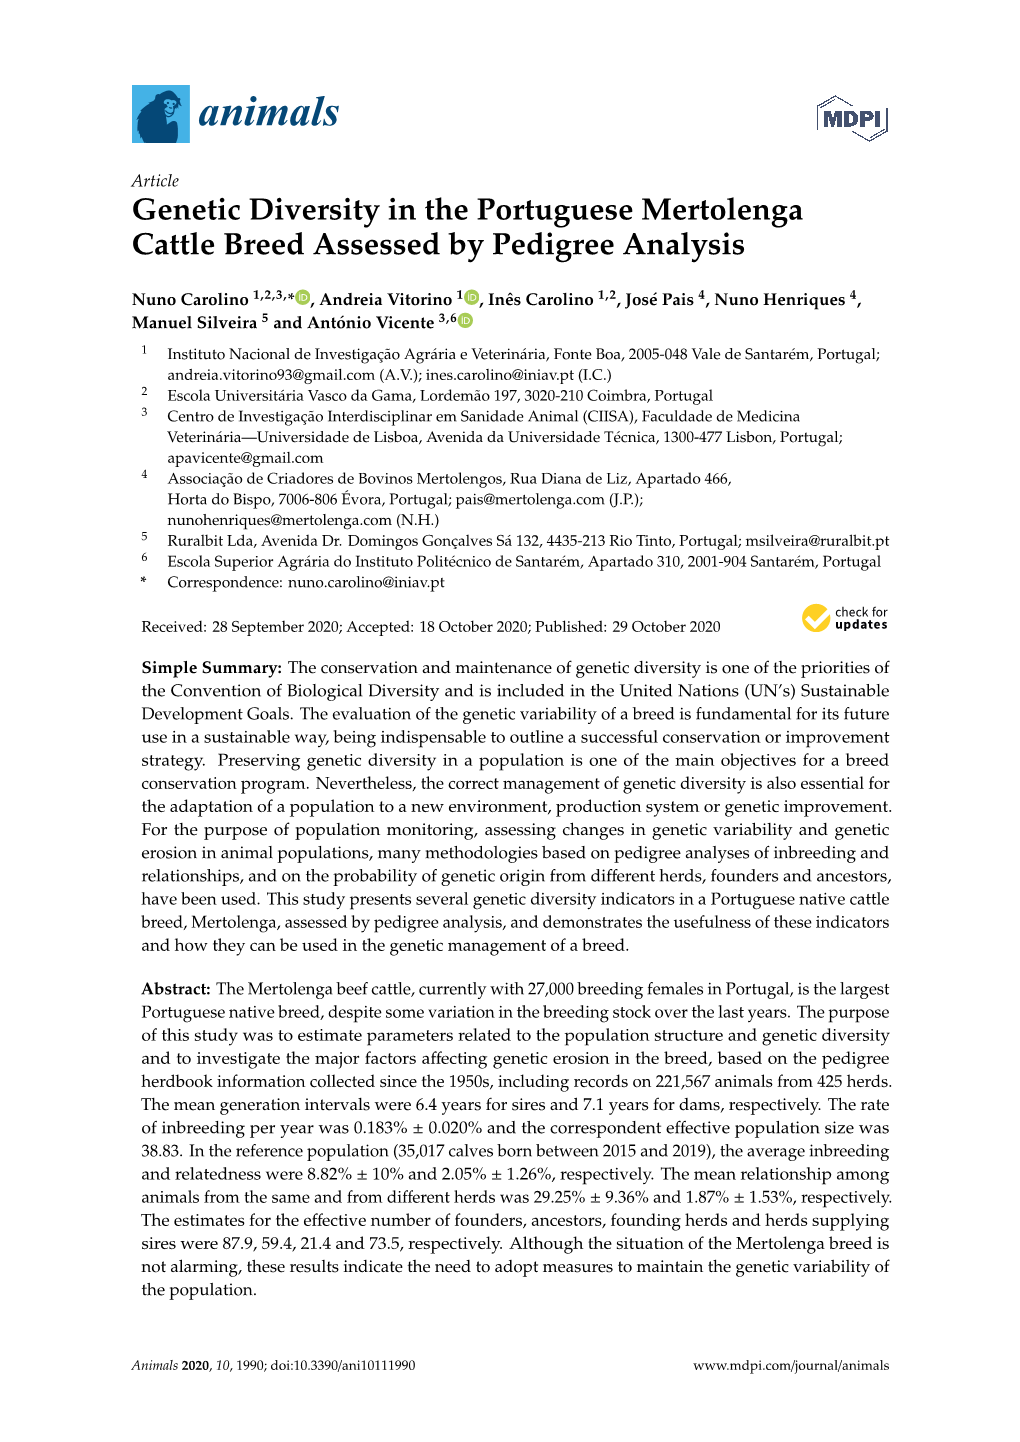 Genetic Diversity in the Portuguese Mertolenga Cattle Breed Assessed by Pedigree Analysis